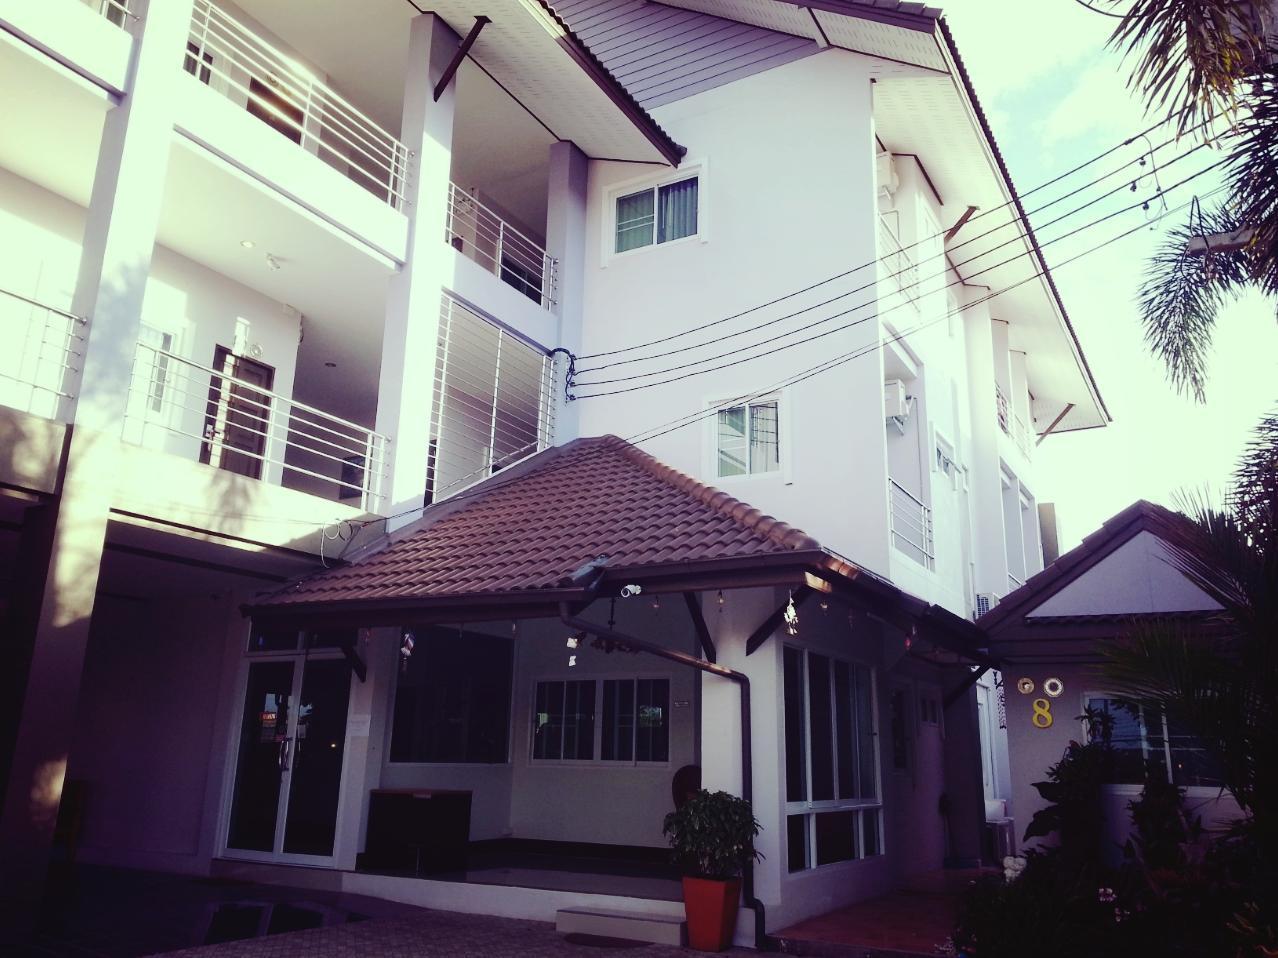 Ben Guesthouse Thailand FAQ 2016, What facilities are there in Ben Guesthouse Thailand 2016, What Languages Spoken are Supported in Ben Guesthouse Thailand 2016, Which payment cards are accepted in Ben Guesthouse Thailand , Thailand Ben Guesthouse room facilities and services Q&A 2016, Thailand Ben Guesthouse online booking services 2016, Thailand Ben Guesthouse address 2016, Thailand Ben Guesthouse telephone number 2016,Thailand Ben Guesthouse map 2016, Thailand Ben Guesthouse traffic guide 2016, how to go Thailand Ben Guesthouse, Thailand Ben Guesthouse booking online 2016, Thailand Ben Guesthouse room types 2016.